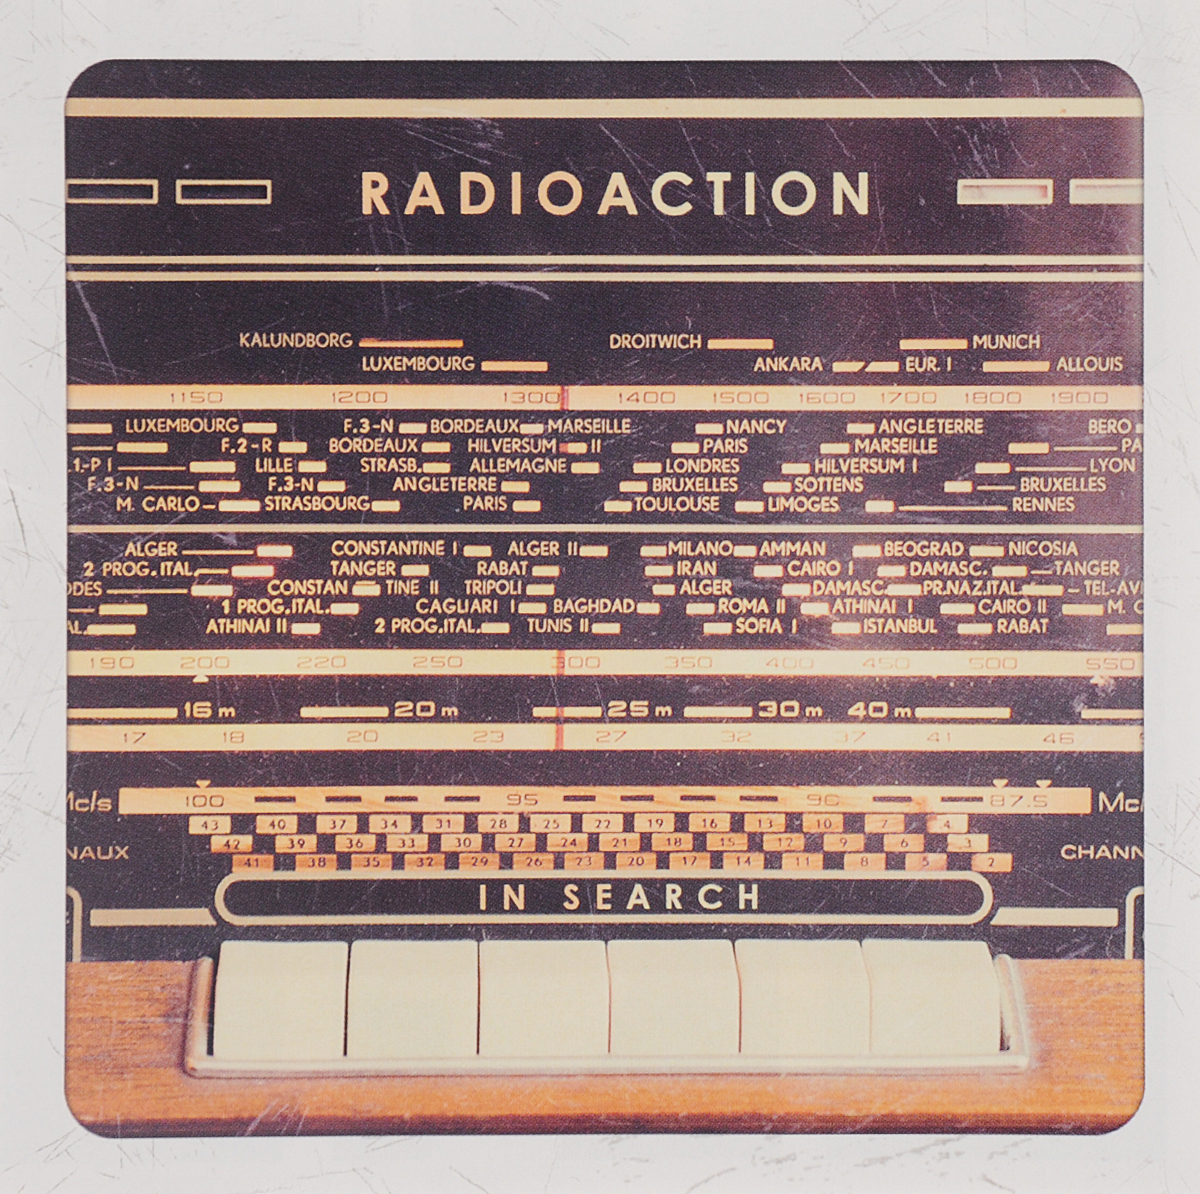 Radioaction. In Search